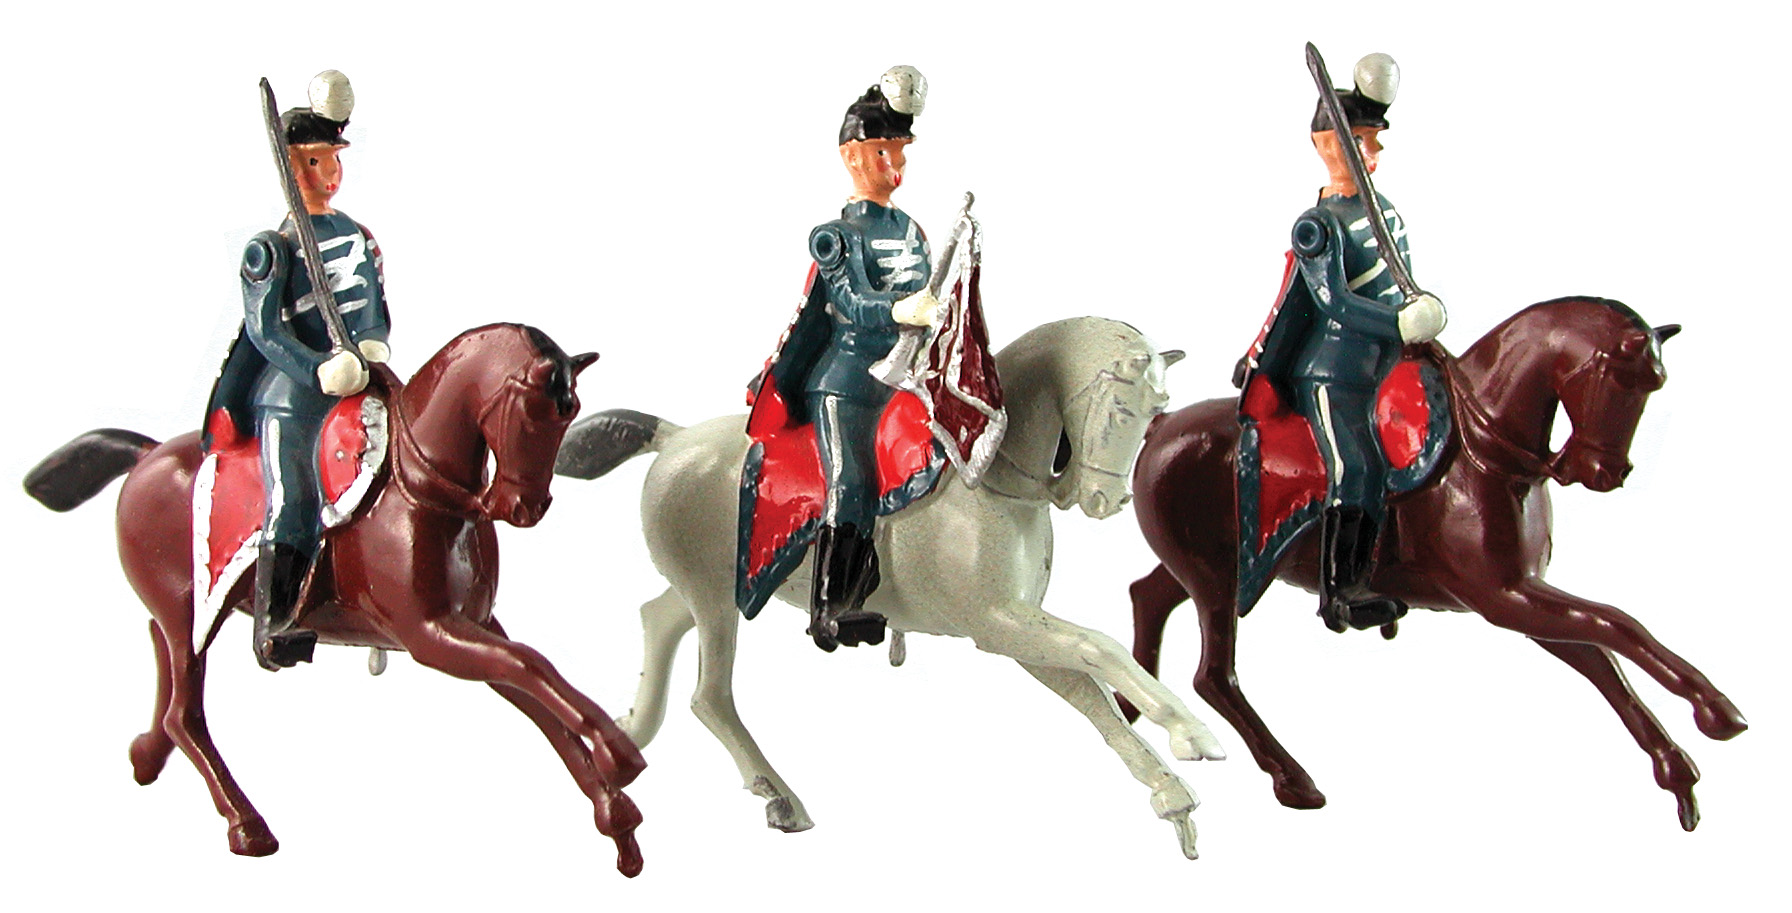 Britains’ range extended well beyond the British Empire, and their stock included dozens of troops from other nations, such as the Danish Gardehussars.